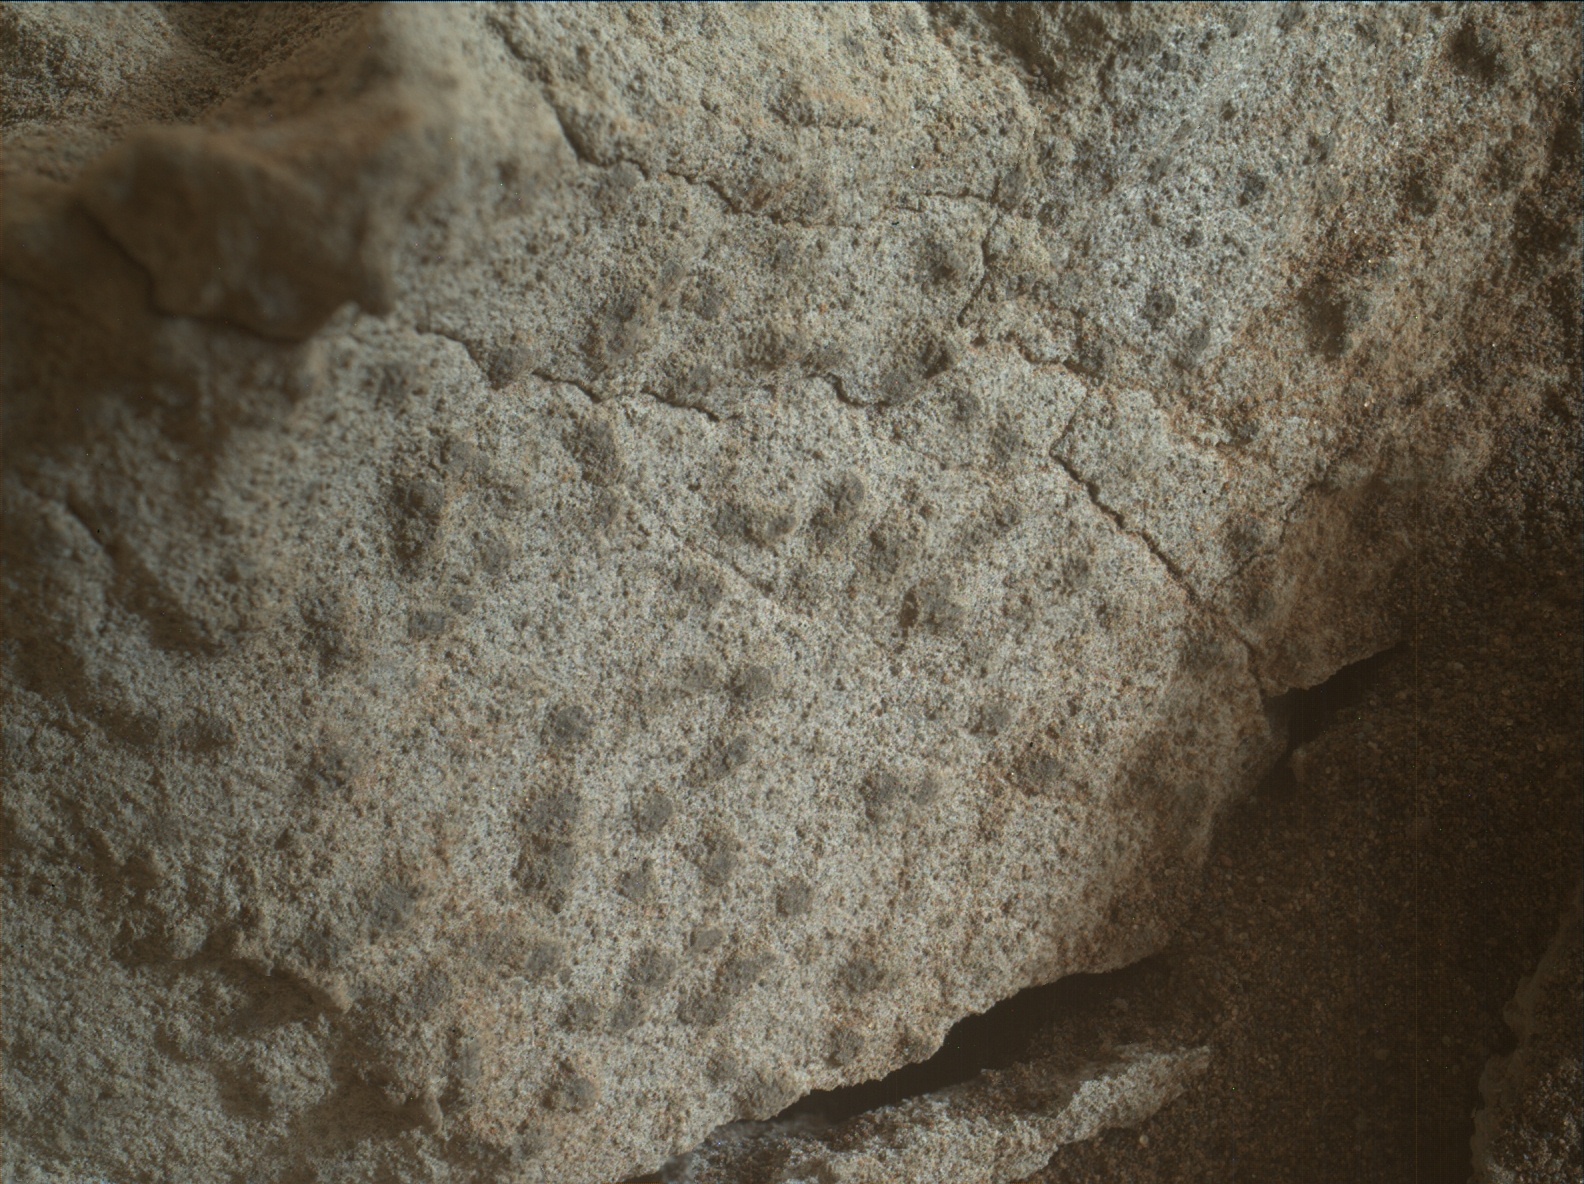 Nasa's Mars rover Curiosity acquired this image using its Mars Hand Lens Imager (MAHLI) on Sol 3454